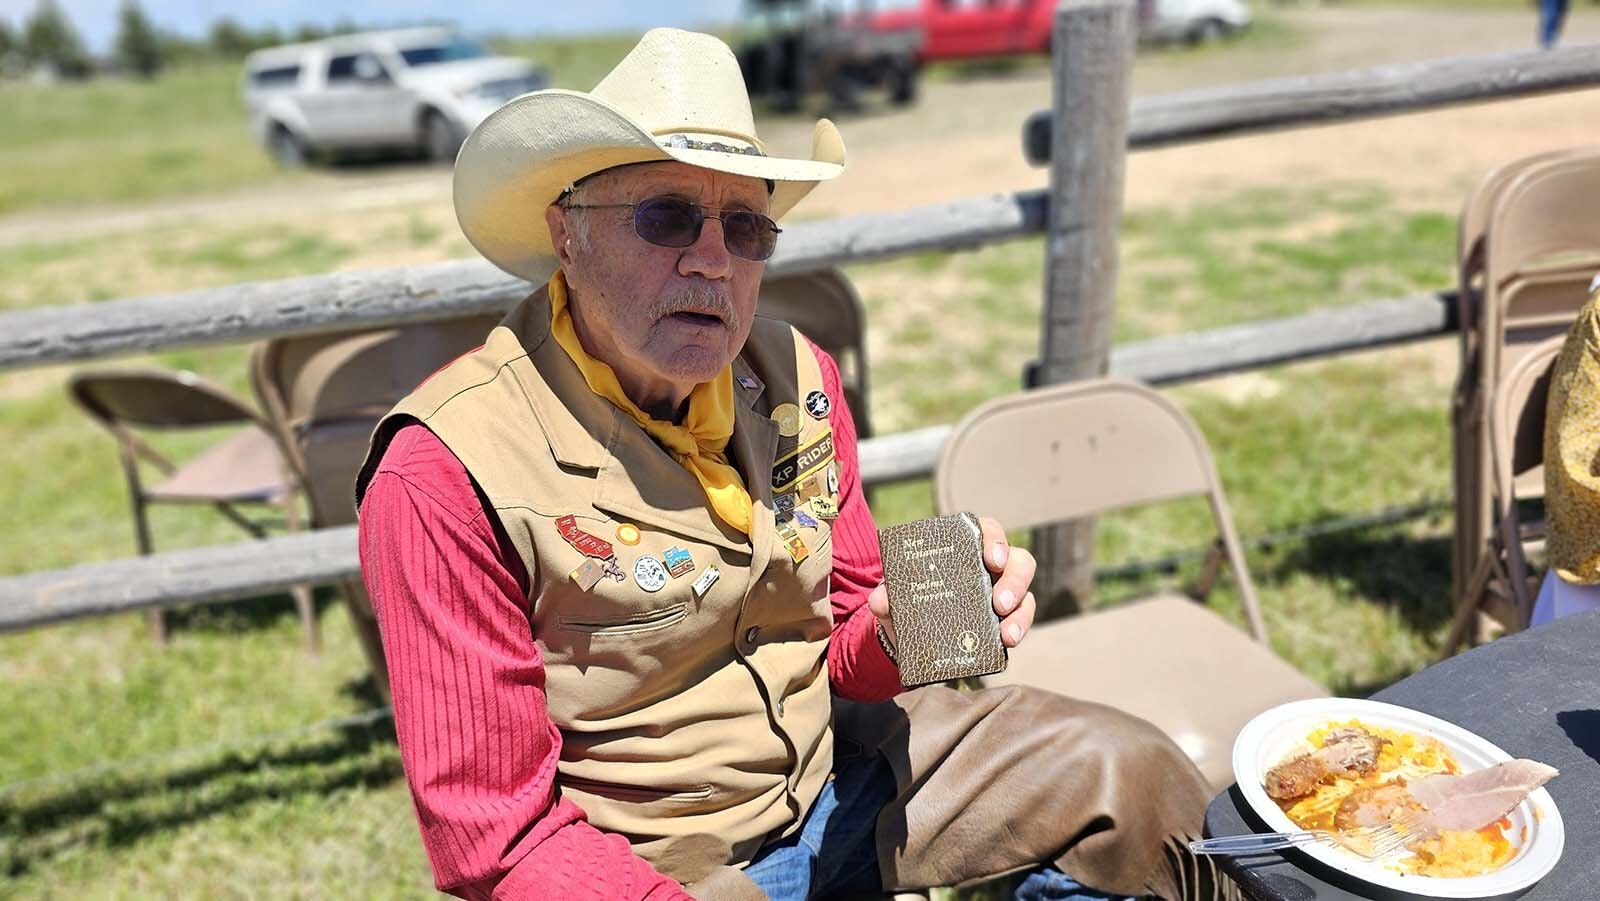 Ron Broten holds up the Bible he carries as part of the Pony Express. He helped lead the pony riders to Buckboard Sunday at Esterbrook Church.